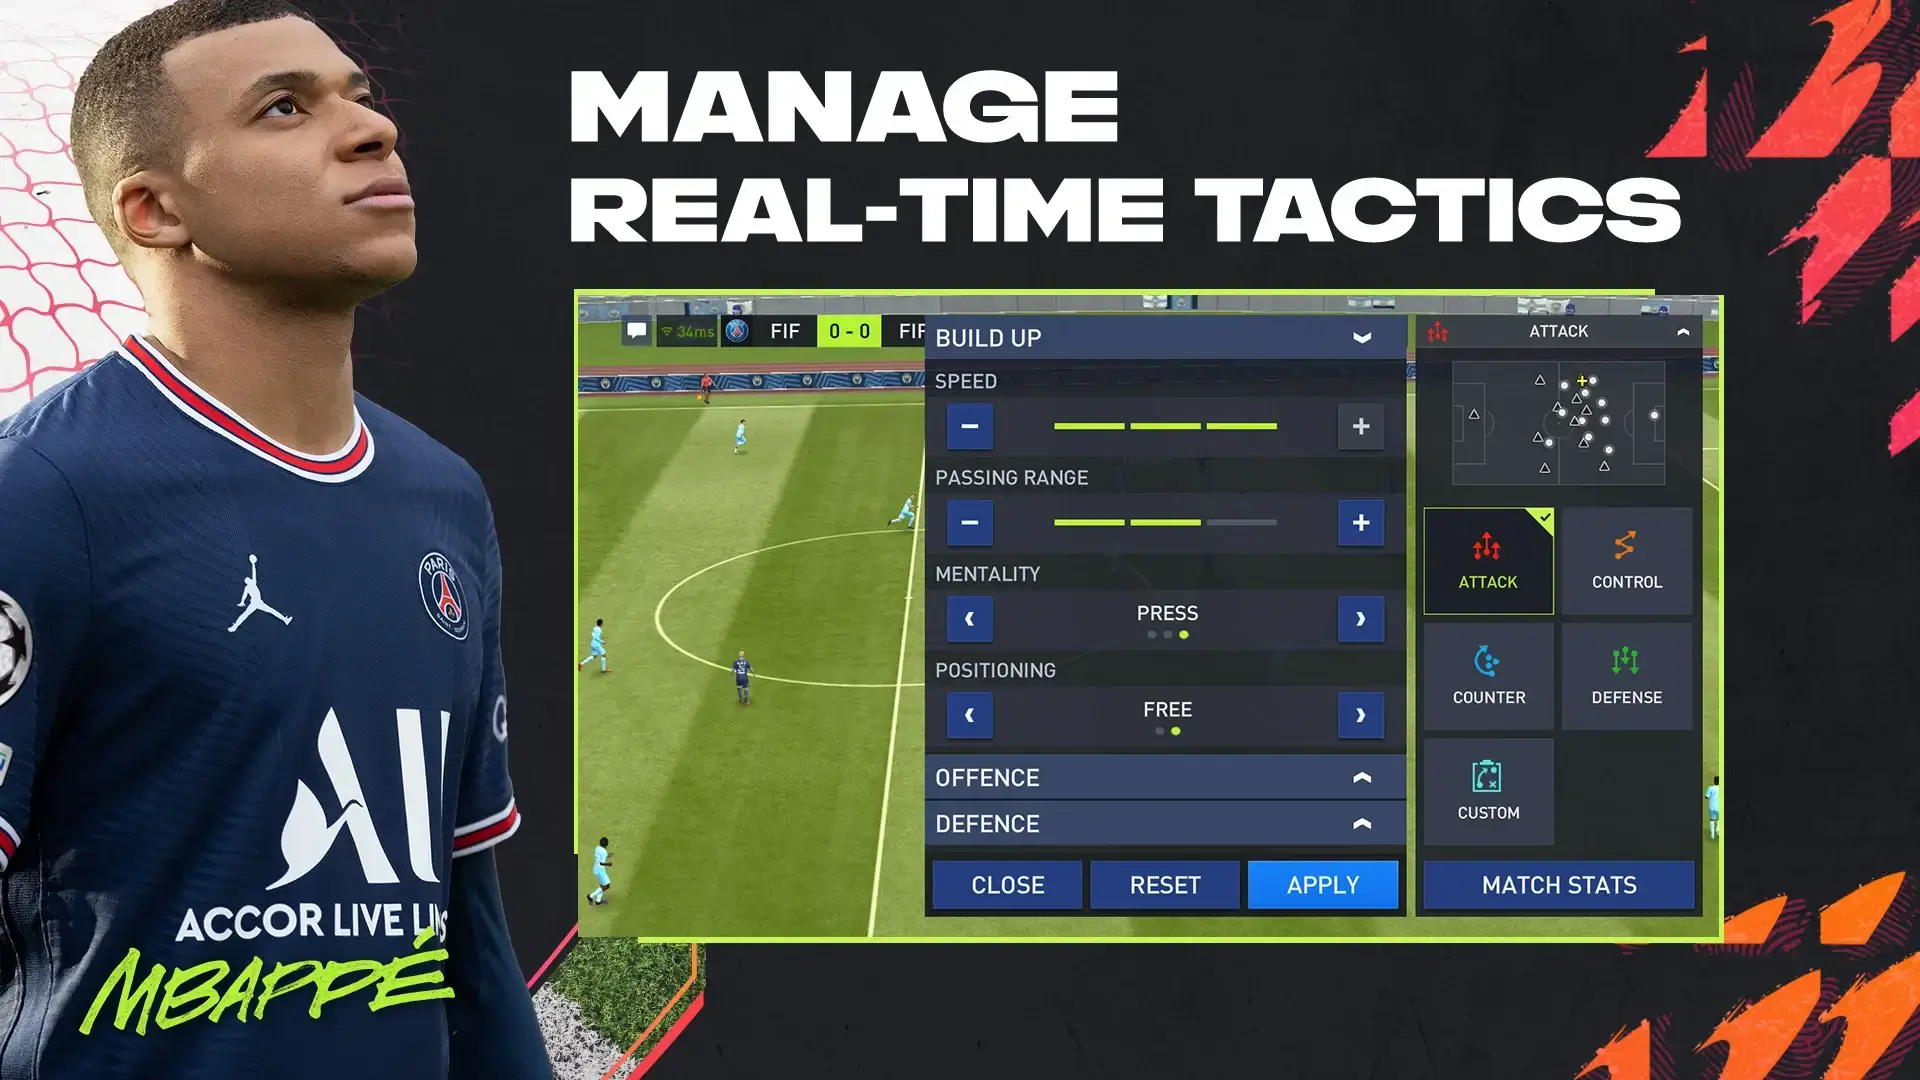 FIFA MOBILE 19 - Face-à-face #2 - Matchs Spectaculaires - [FIFA MOBILE -  ANDROID] - video Dailymotion